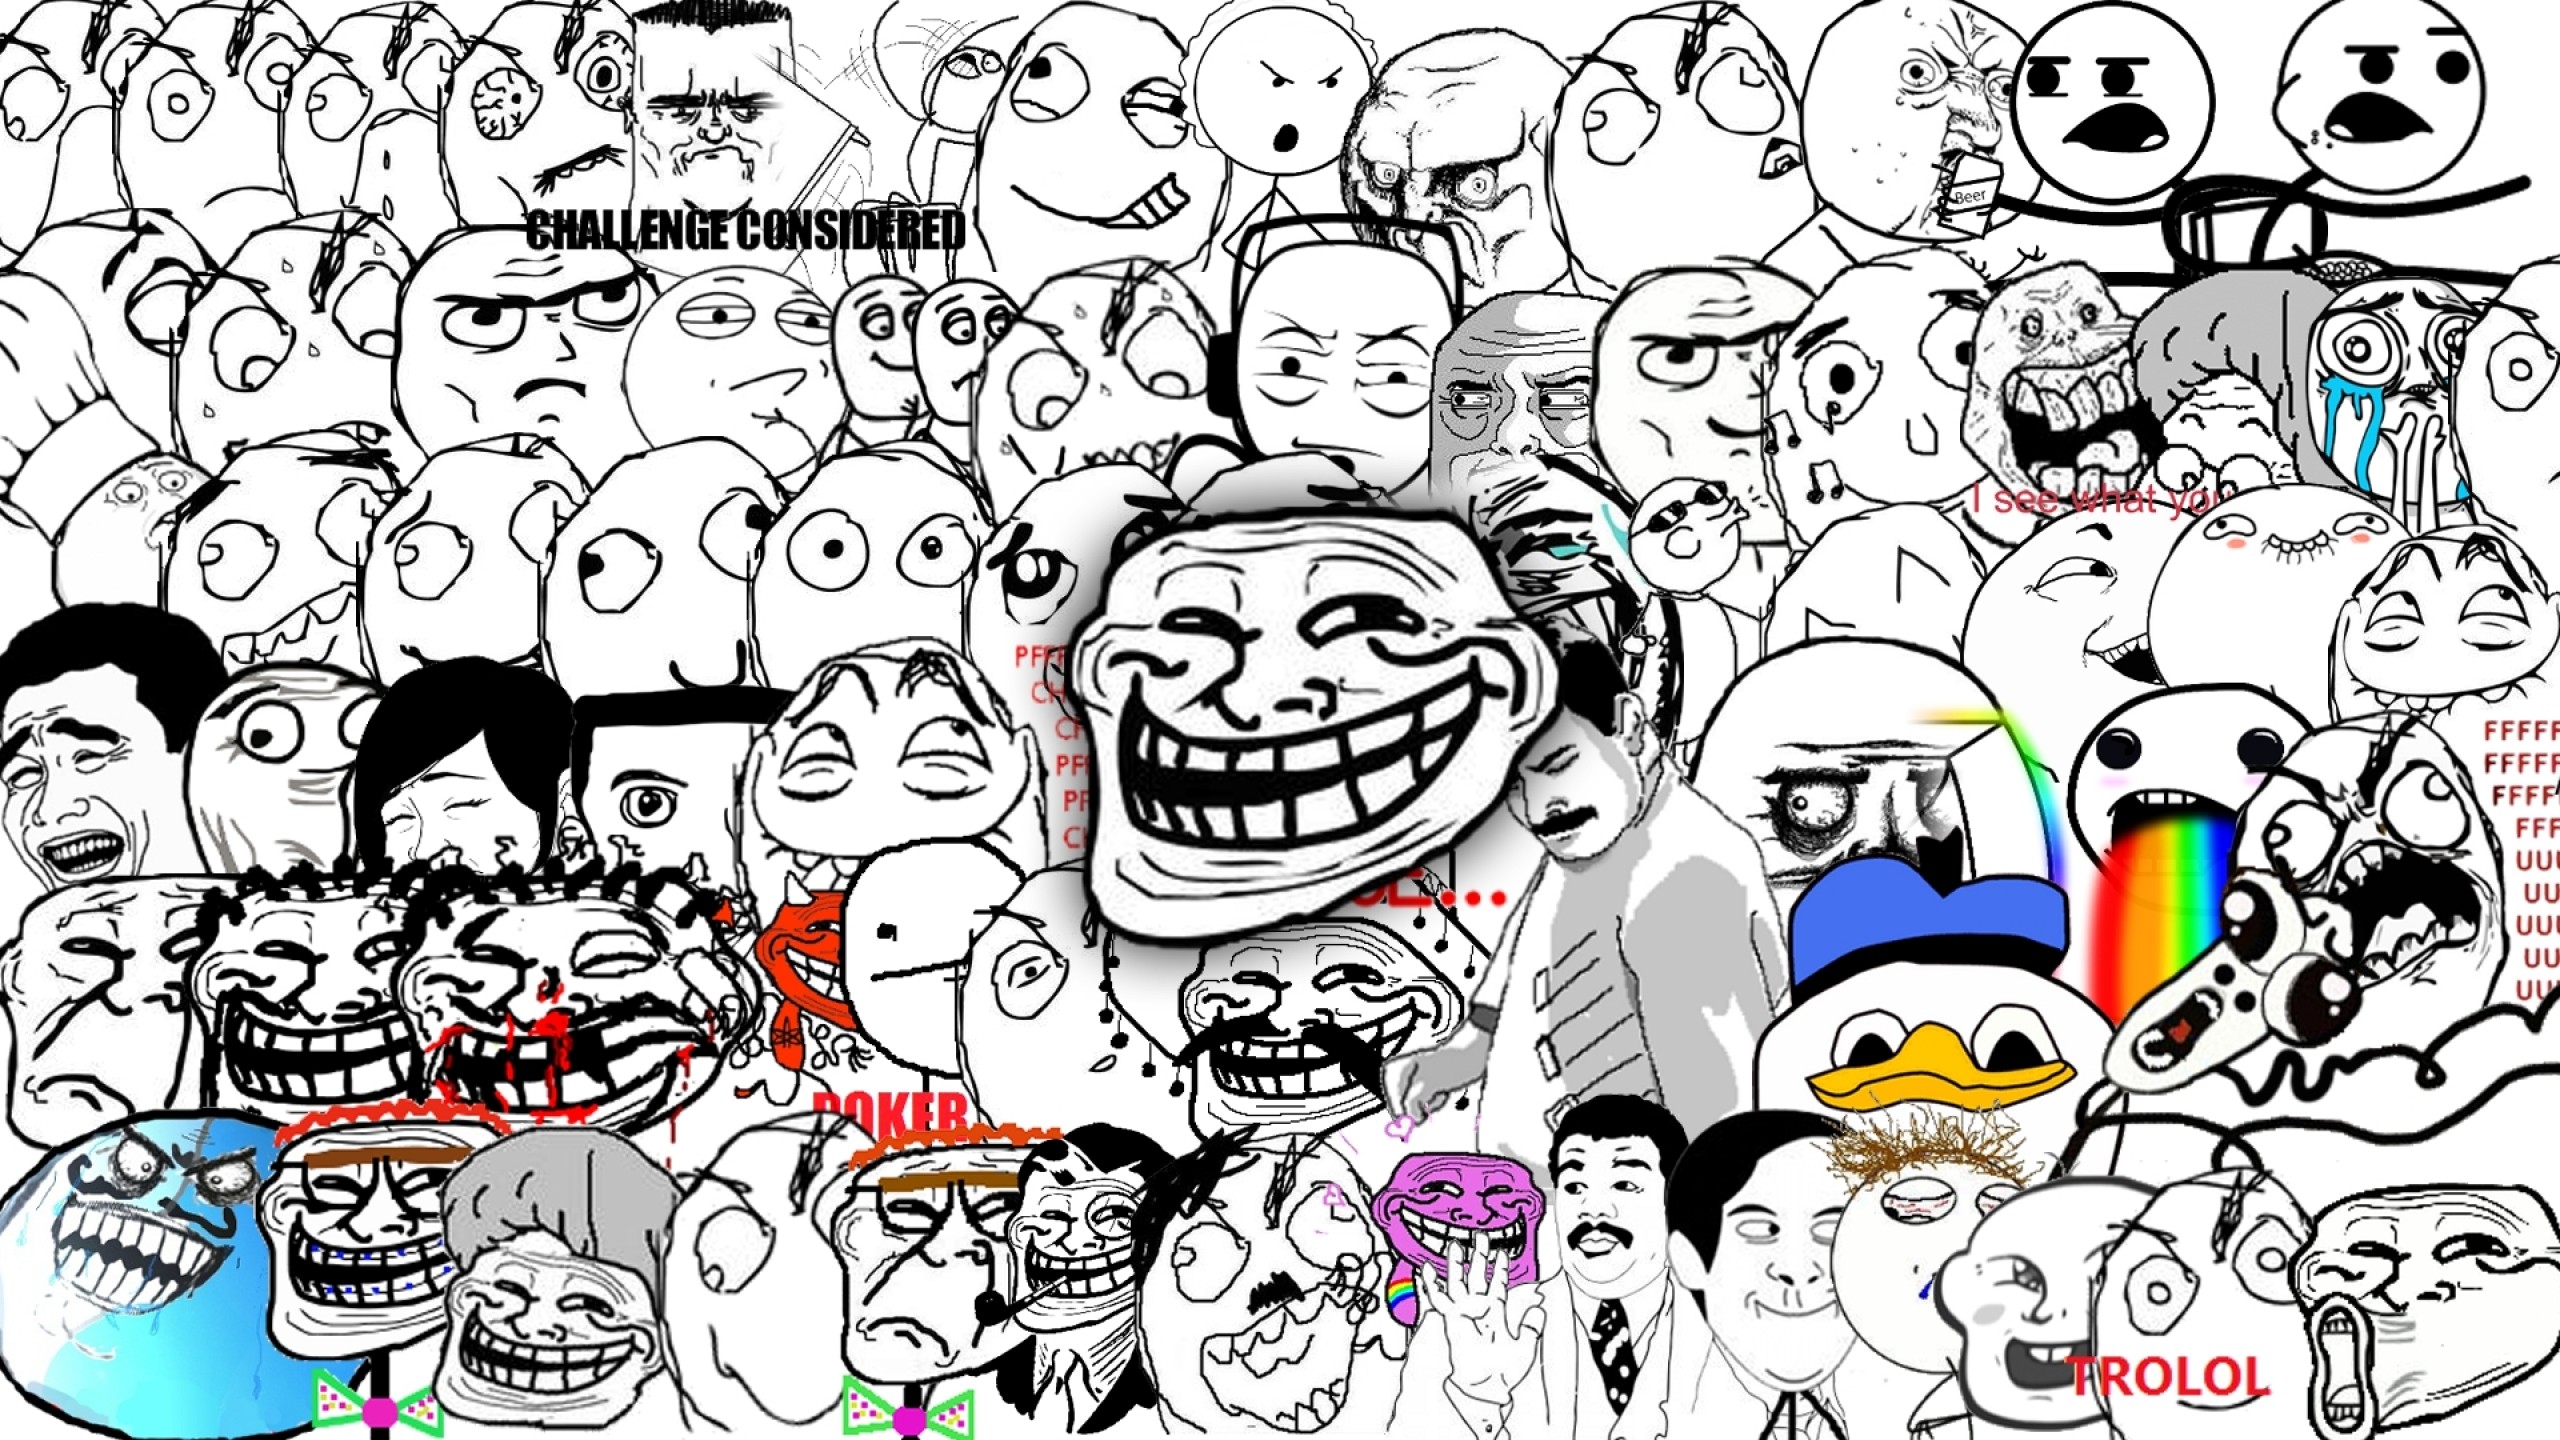 wallpaper troll,people,cartoon,white,facial expression,crowd